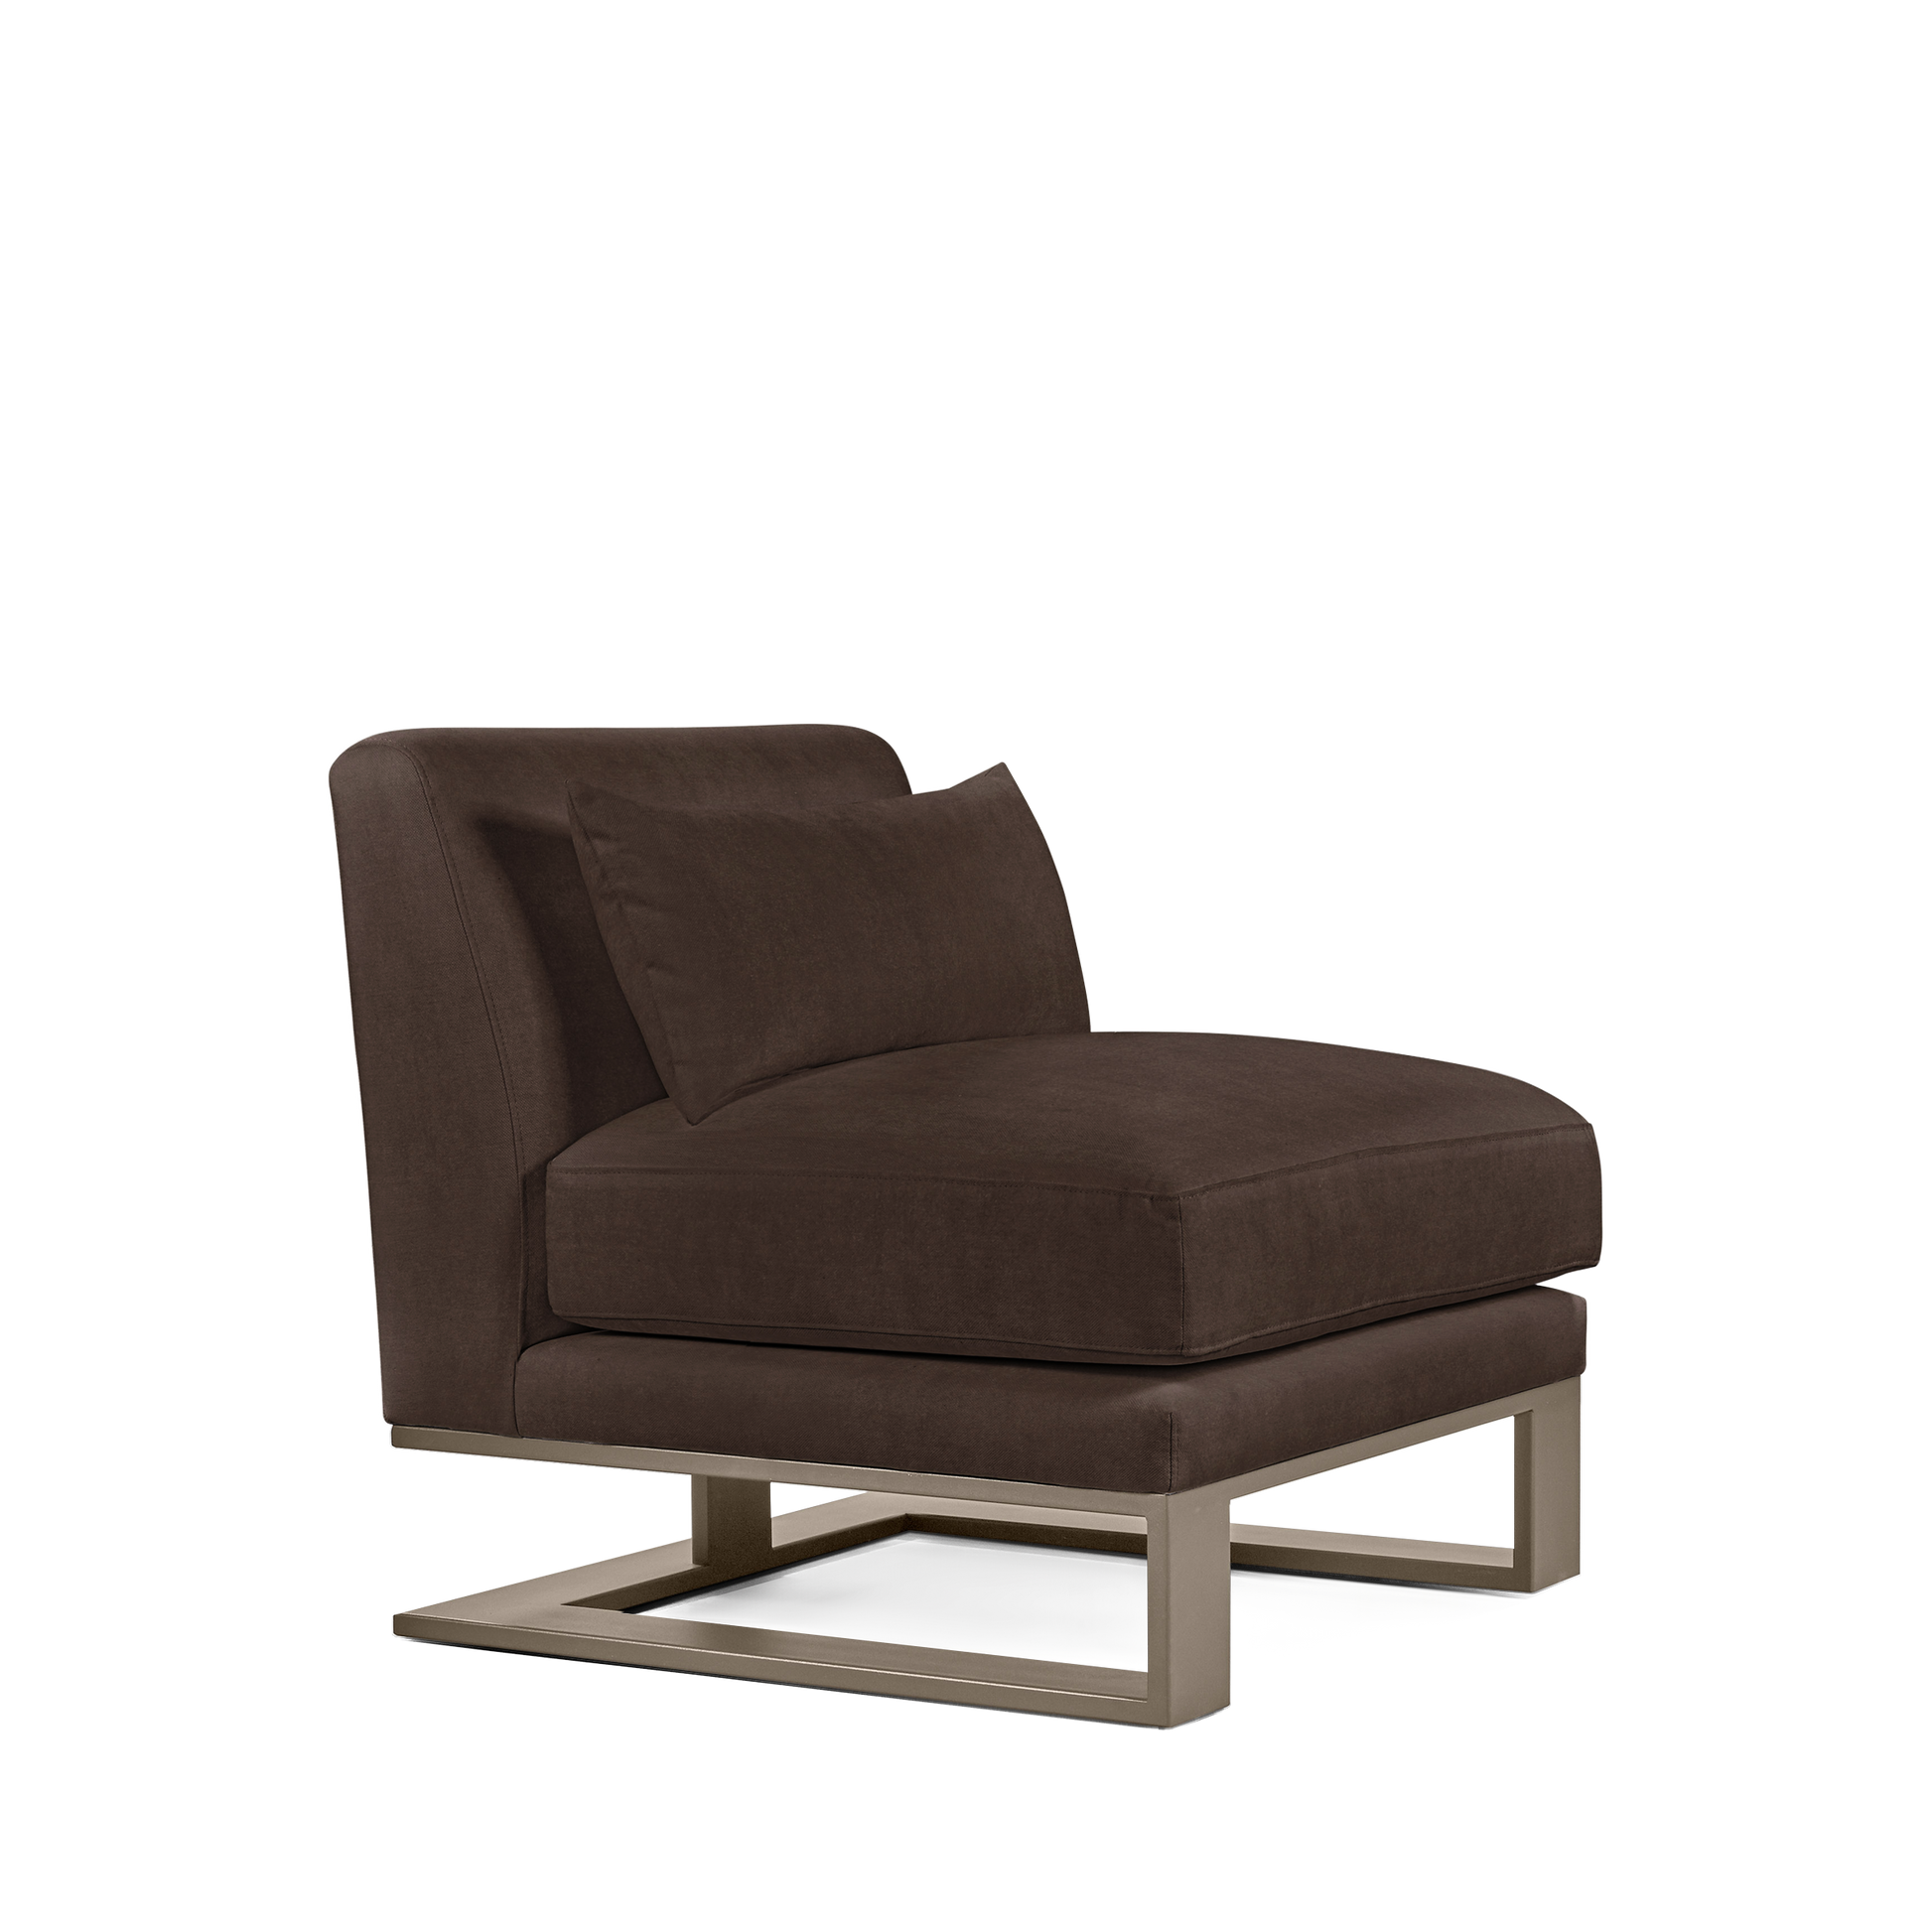 Alpes armchair with suede brown textile and champagne colored wood legs 